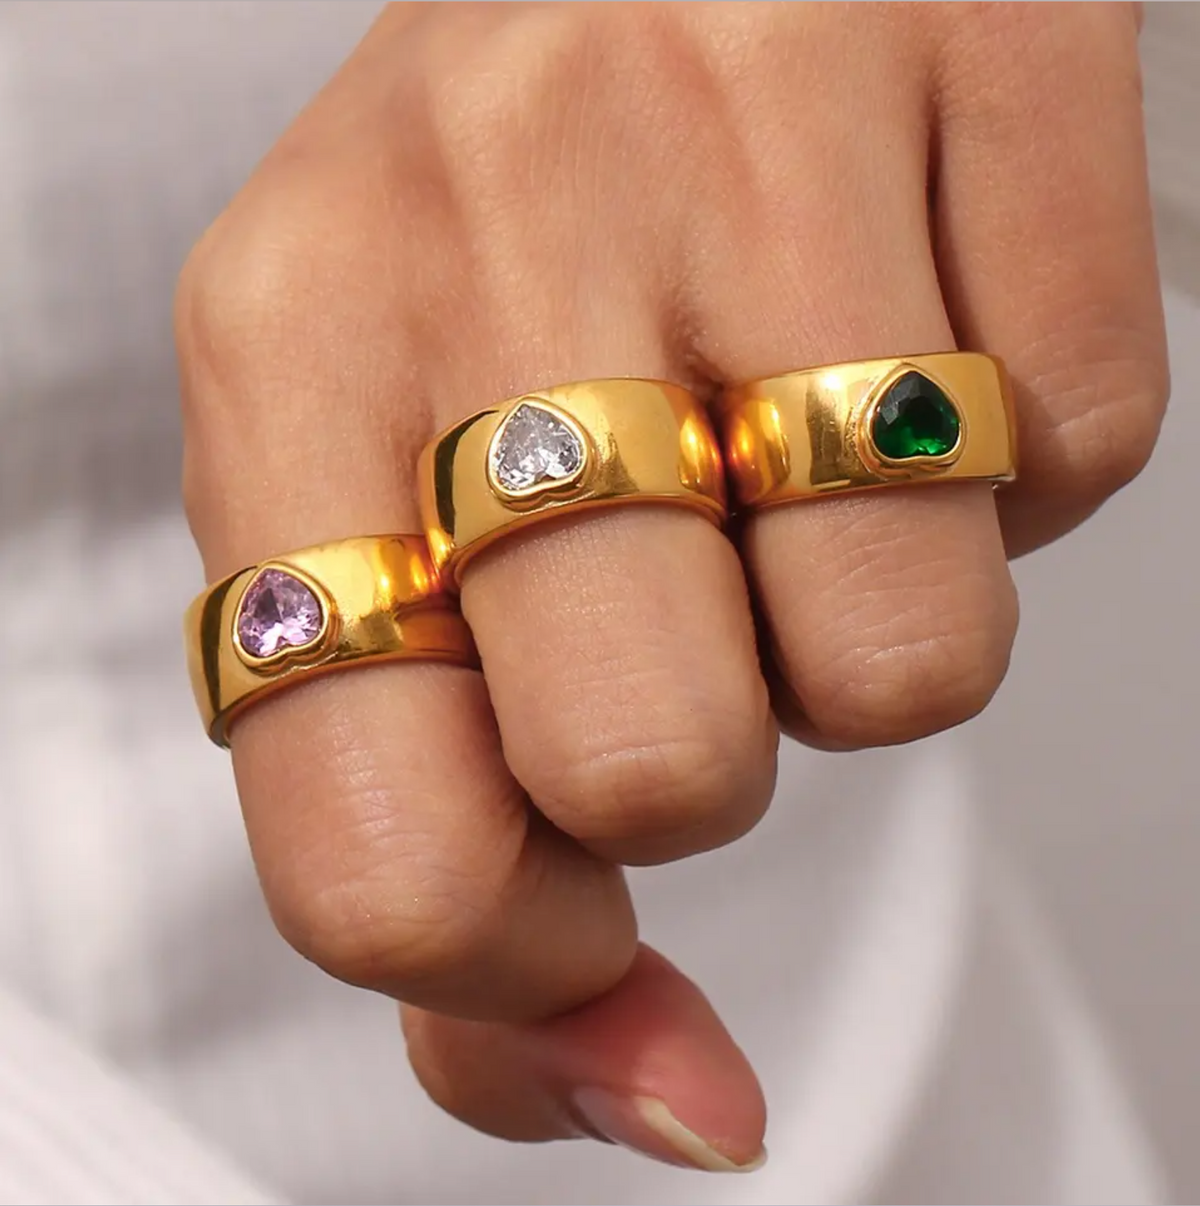 Sailor scout chunky ring